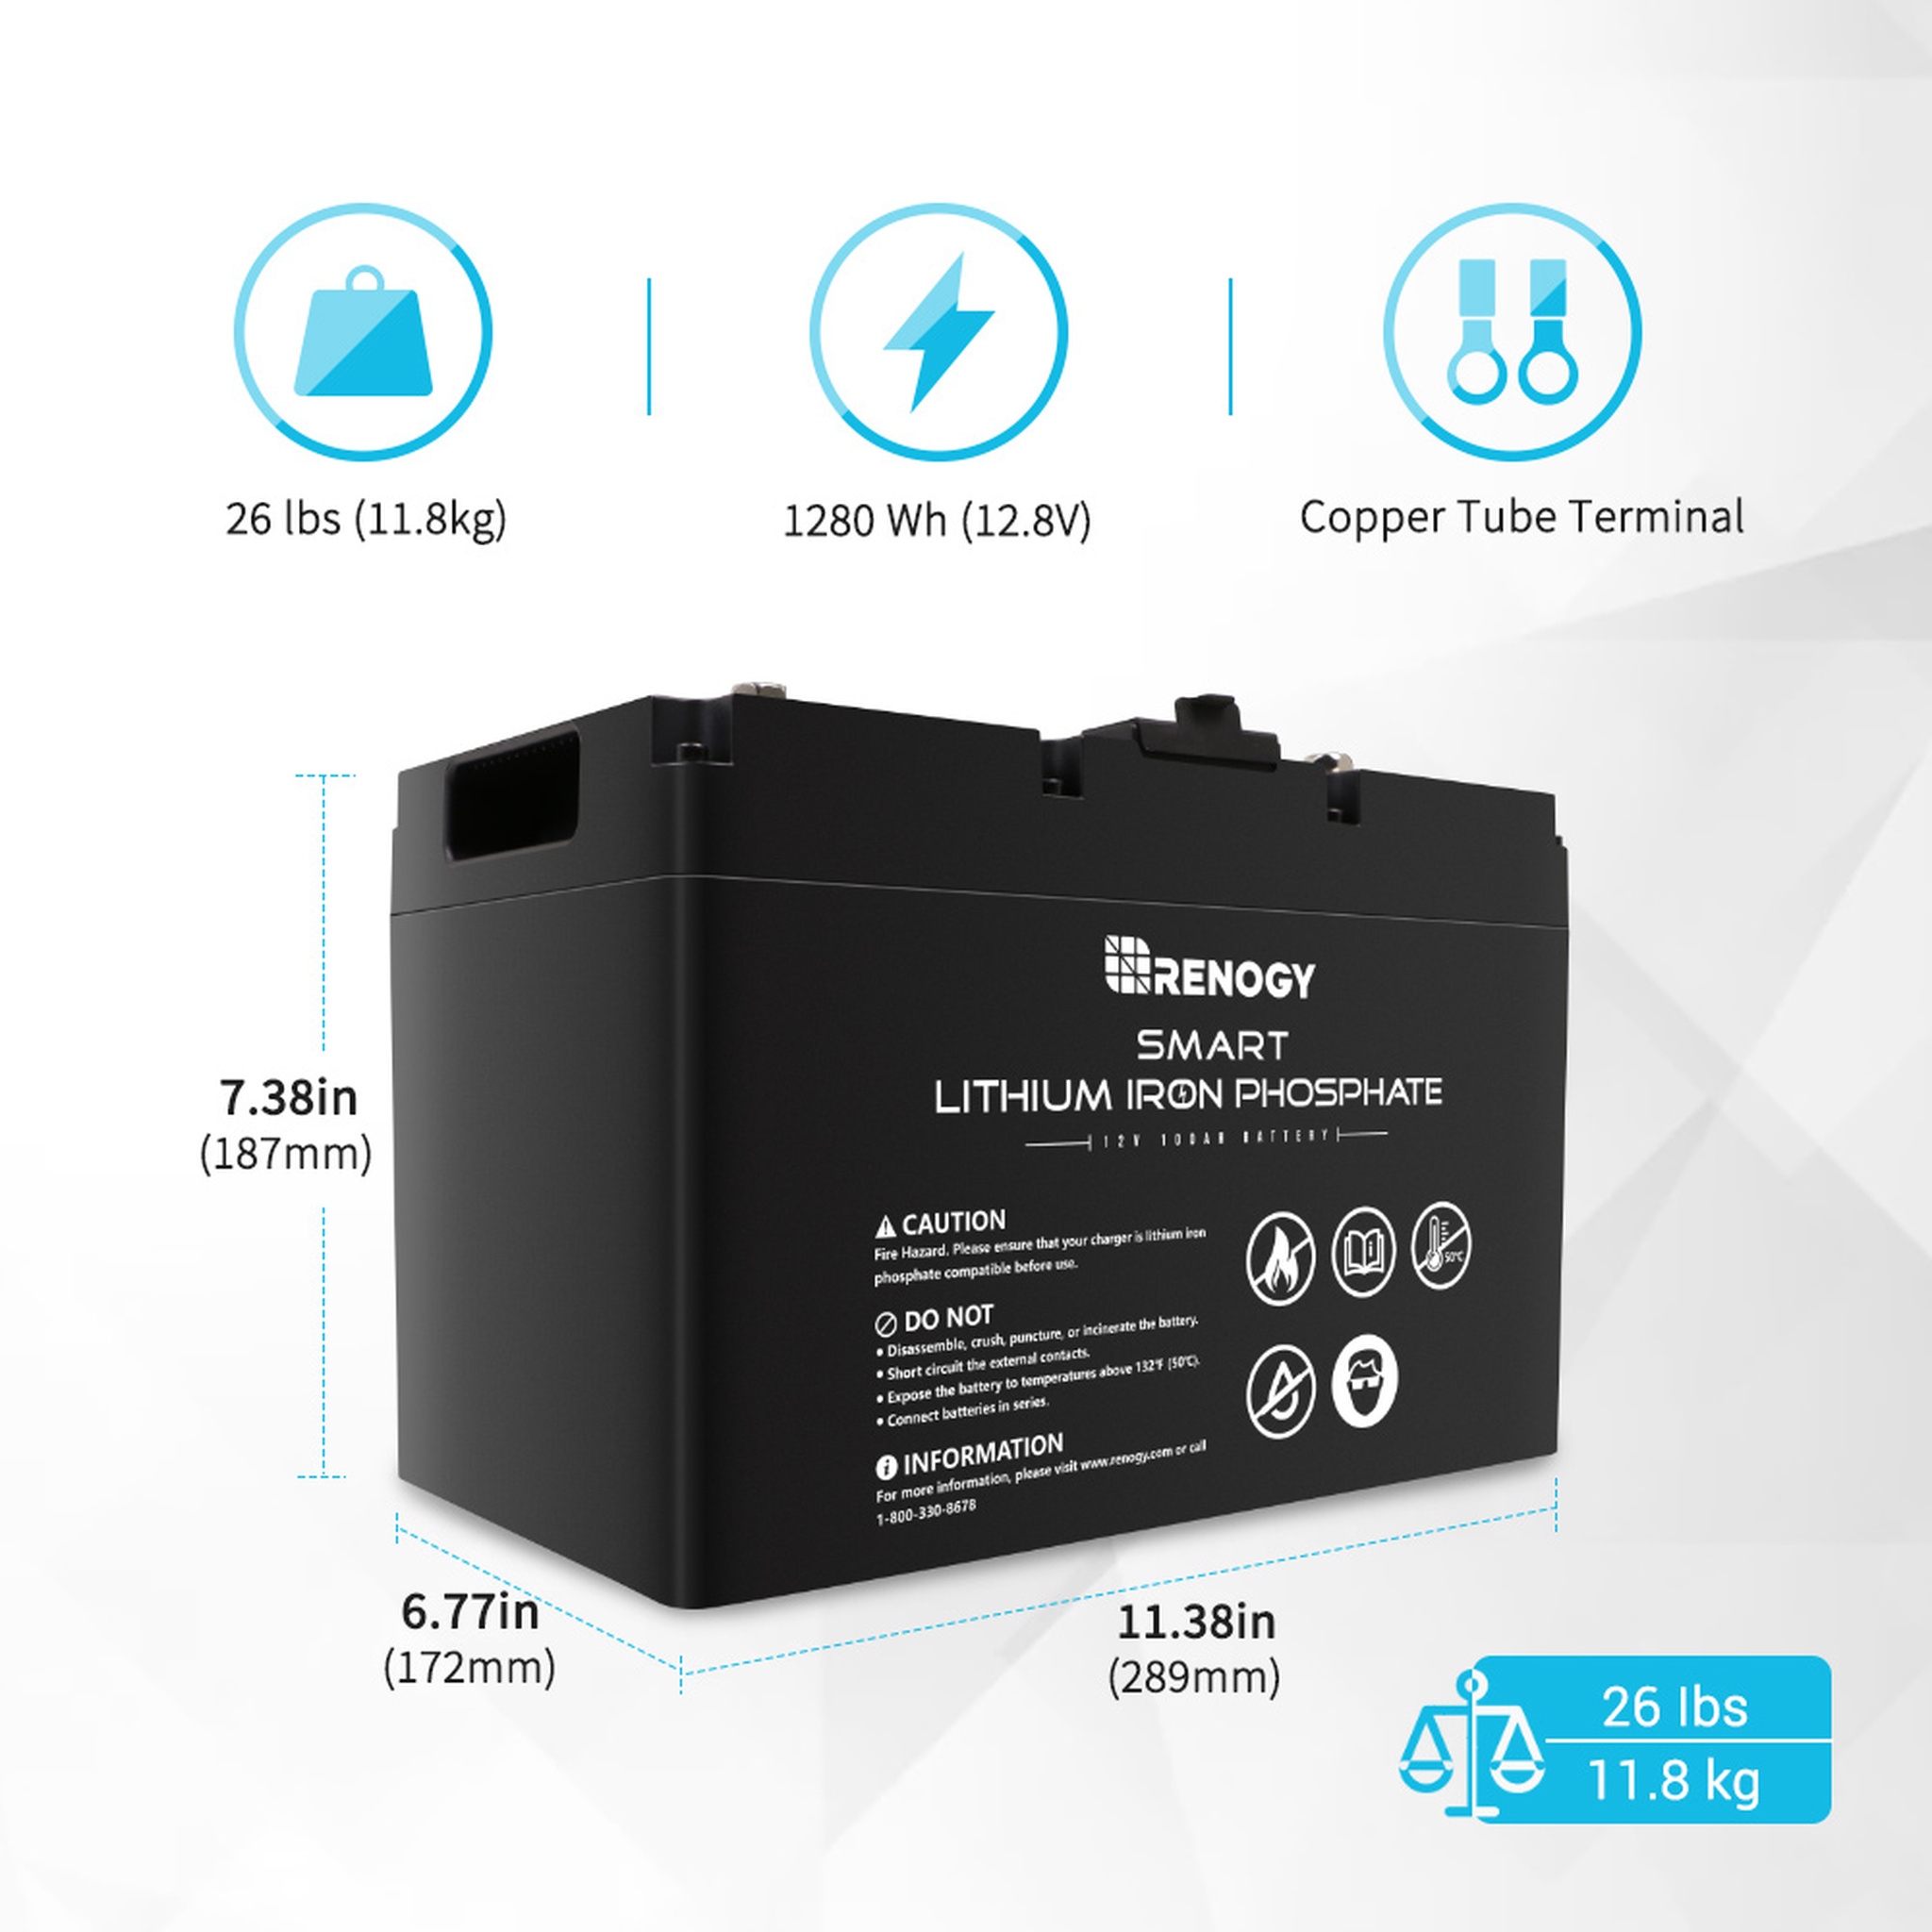 Renogy 12V 100Ah LiFePO4 Deep Cycle Lithium Battery, over 4000 Cycles, Built-in BMS, Backup Power for RV, Marine, Off-Grid System, Maintenance-Free - image 5 of 9